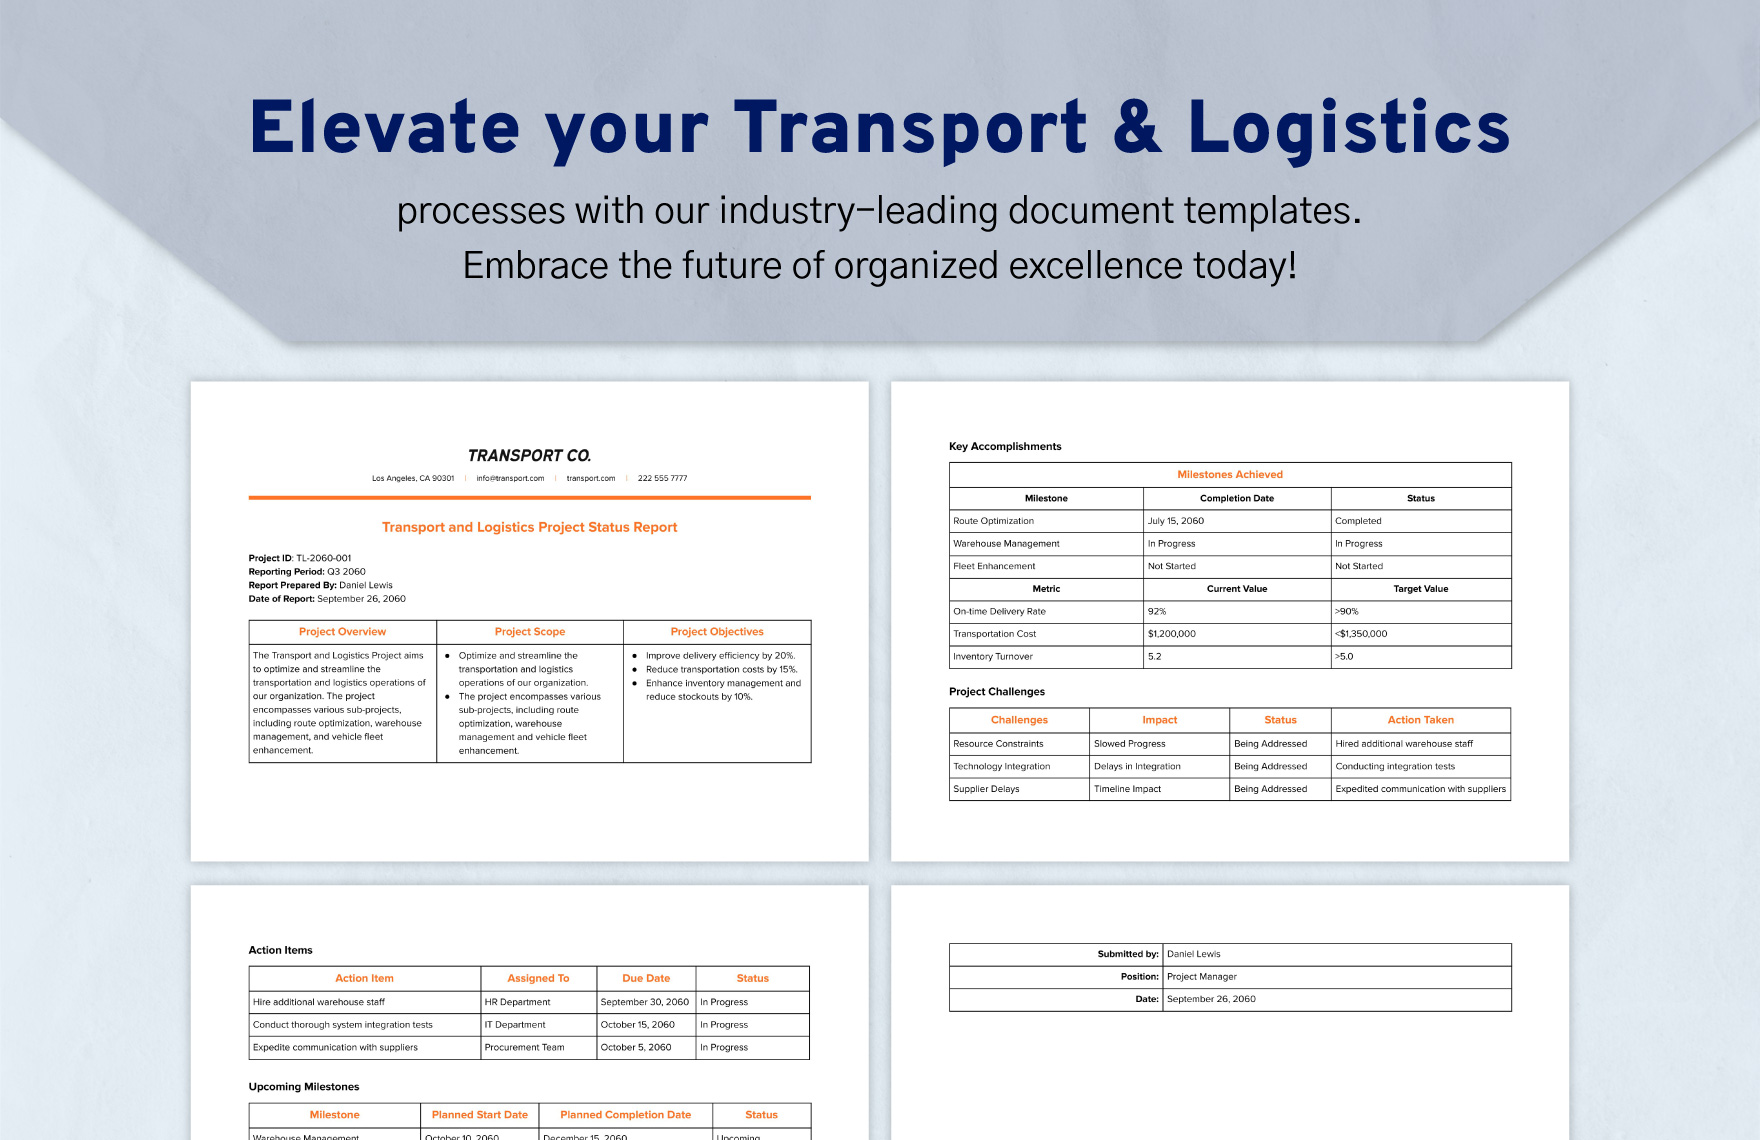 Transport and Logistics Project Status Report Template